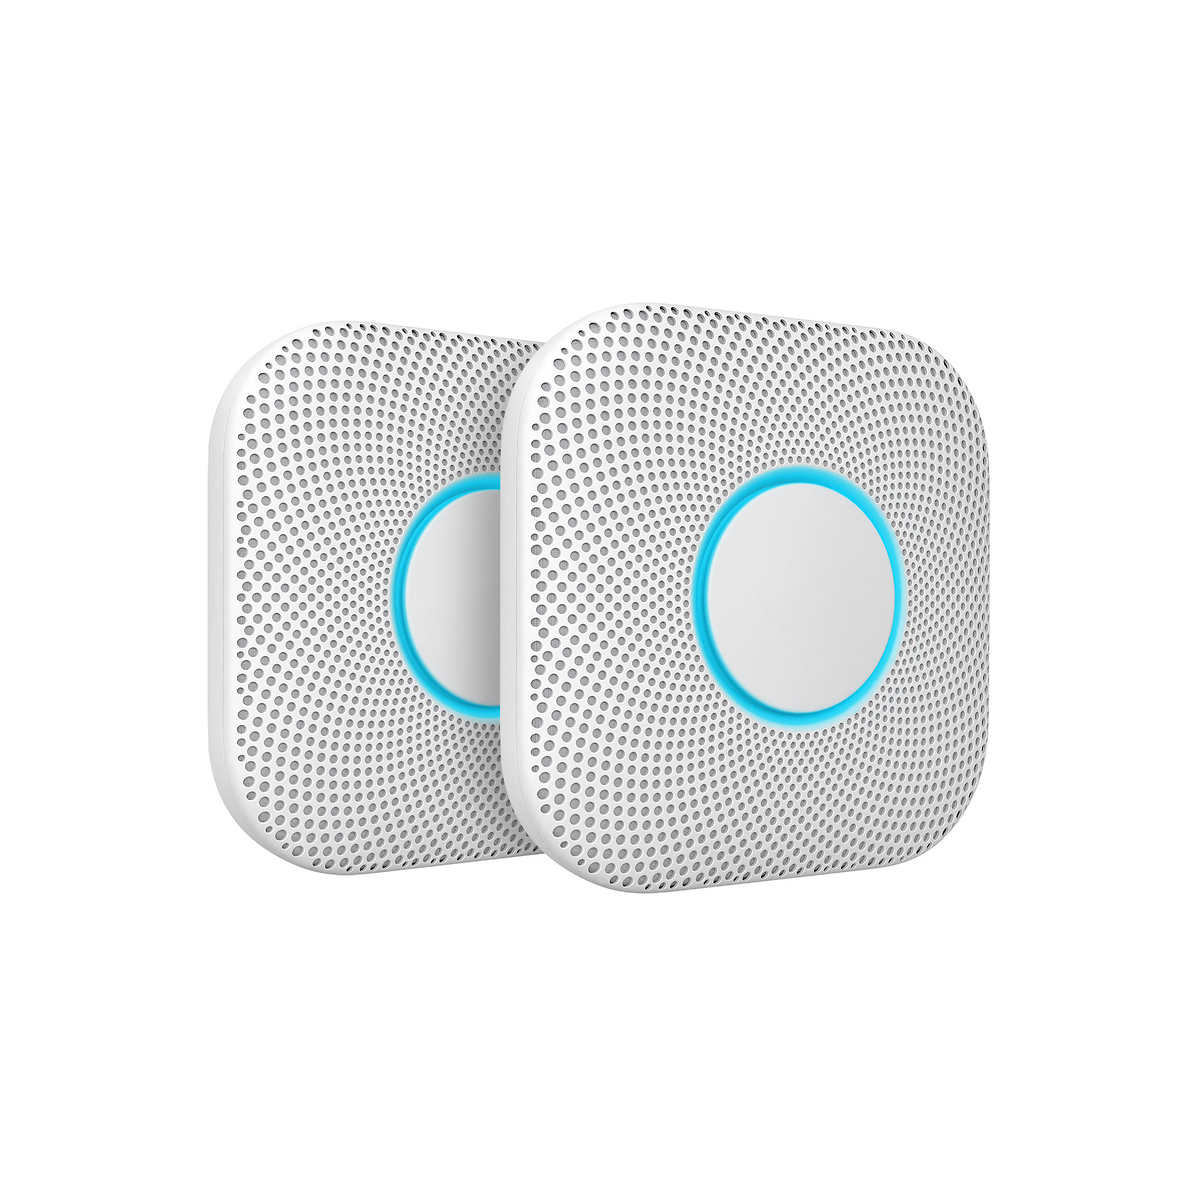 Google Nest Protect $199 for TWO pack at Costco B&M